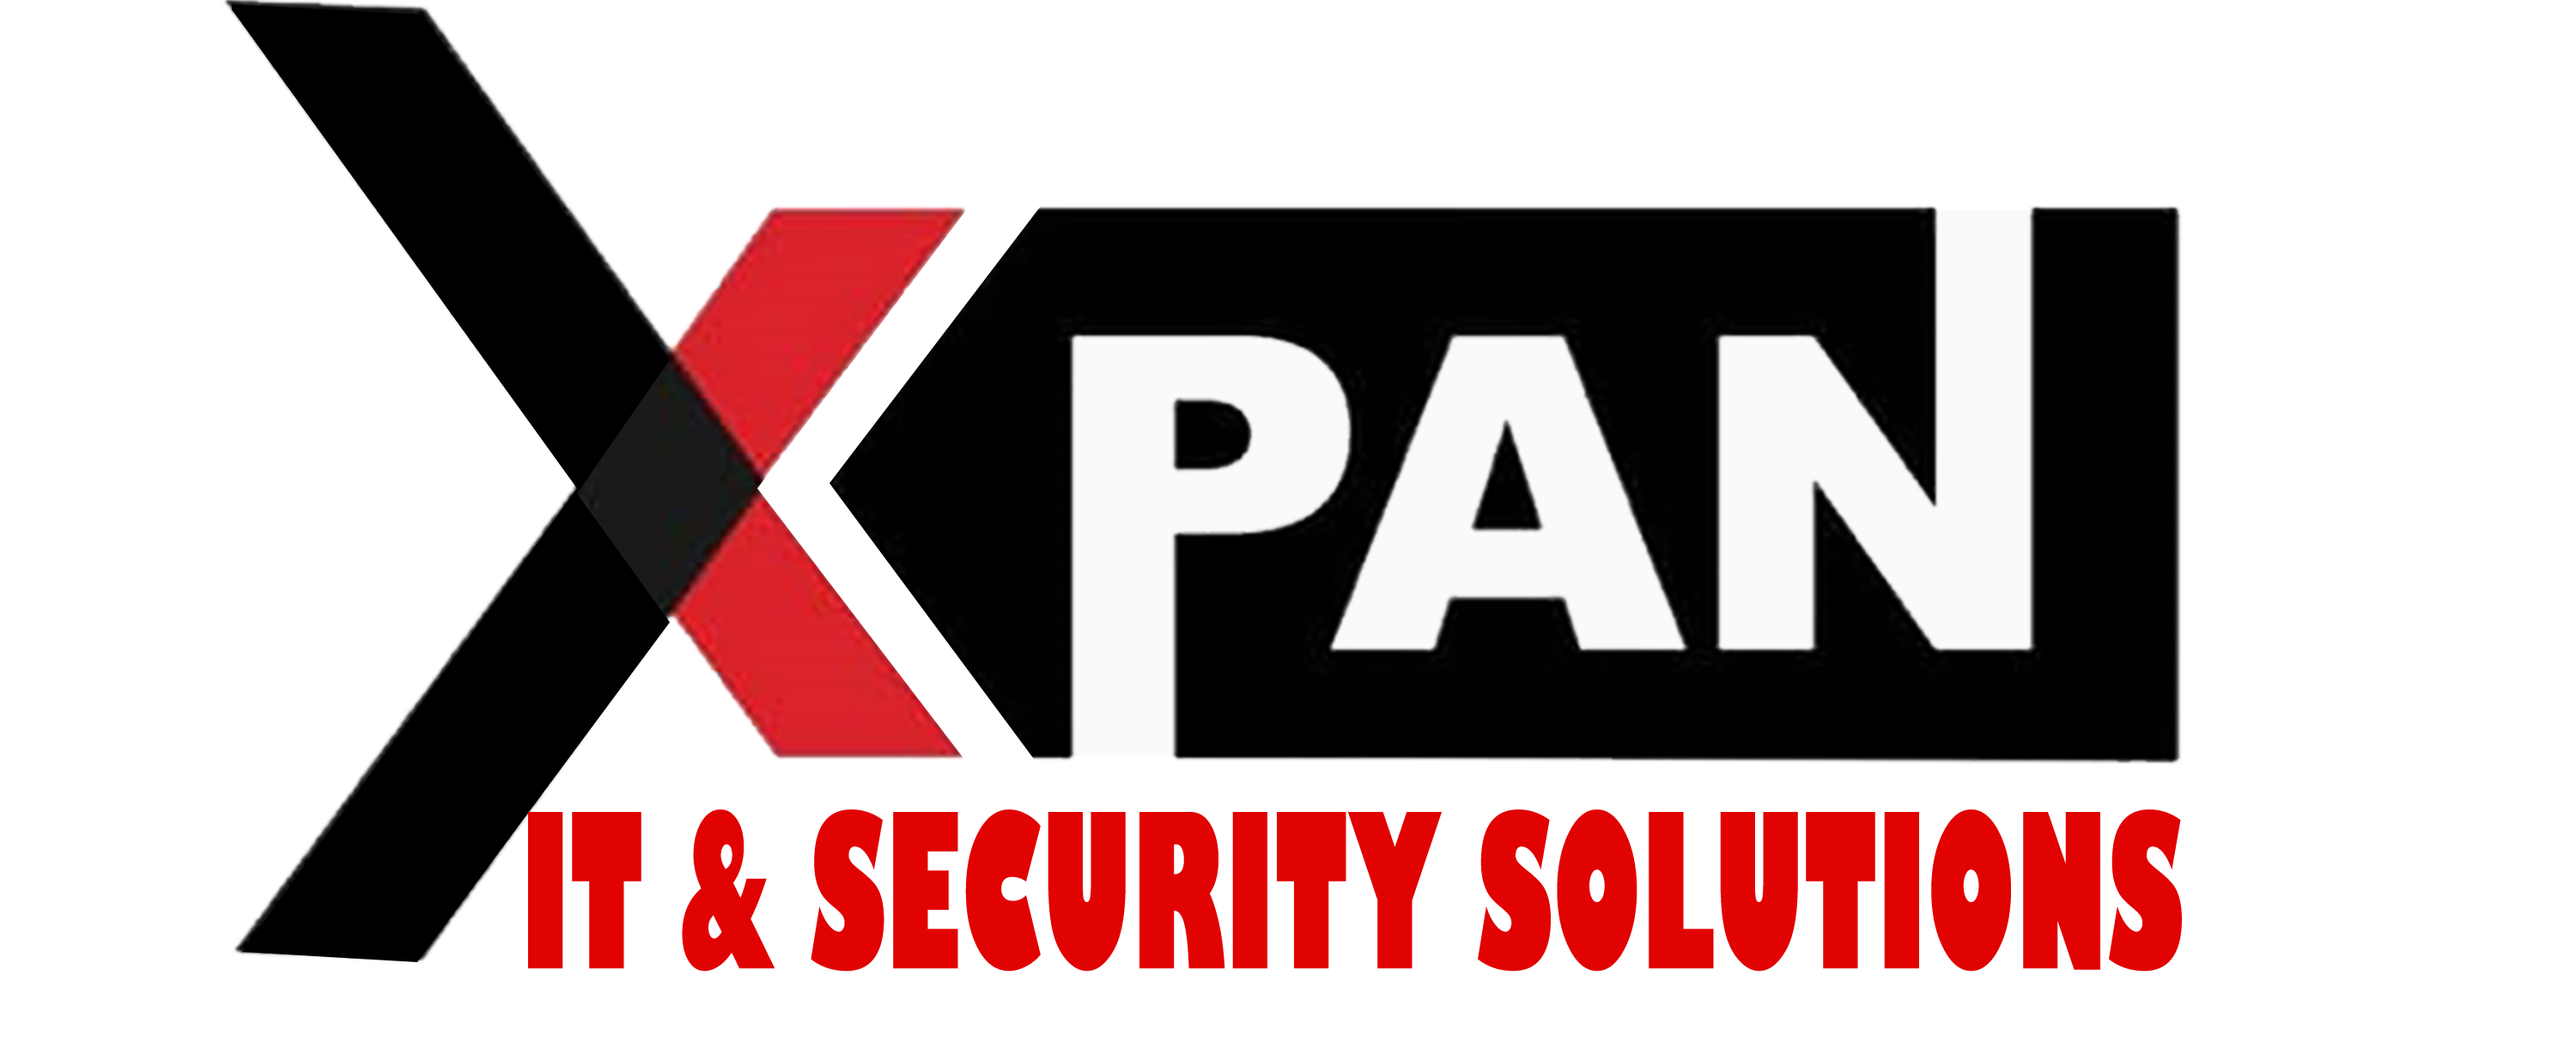 Xpansolutions 